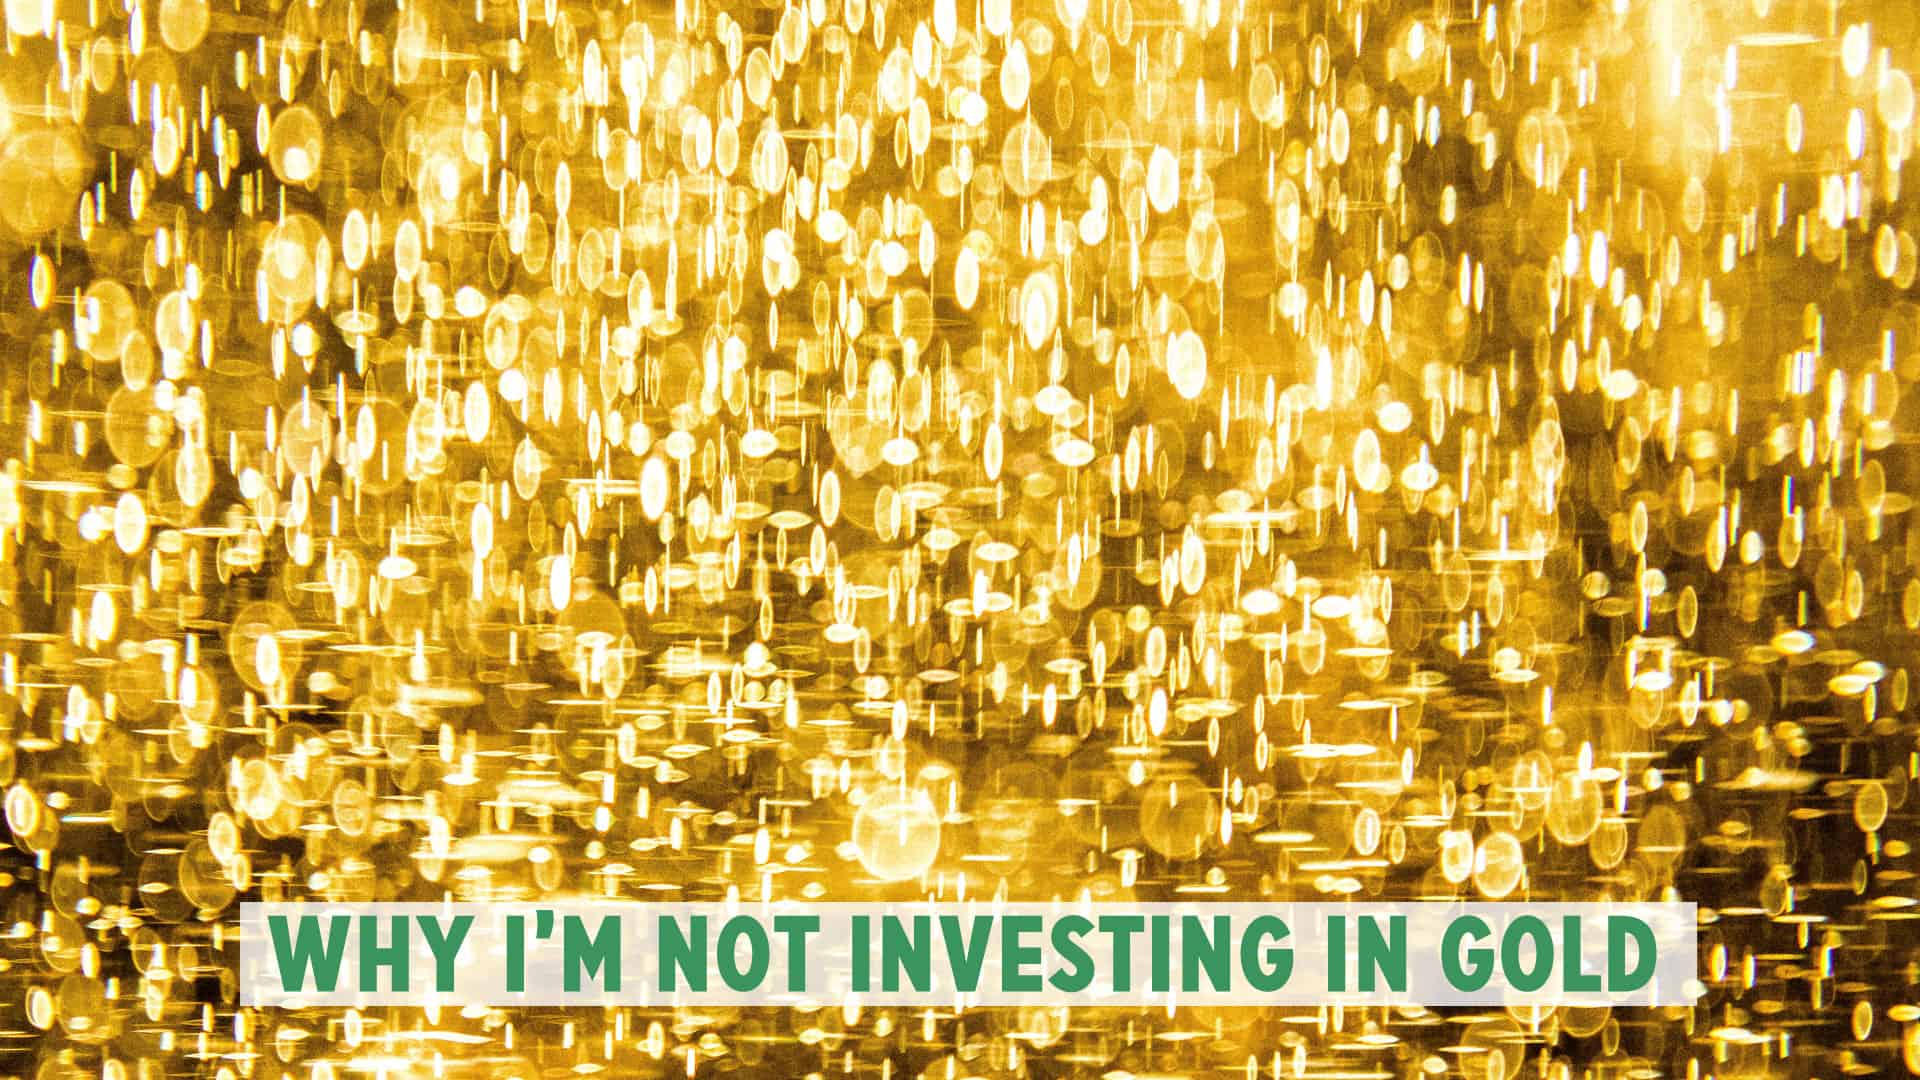 All that glitters: Why I’m not investing in gold